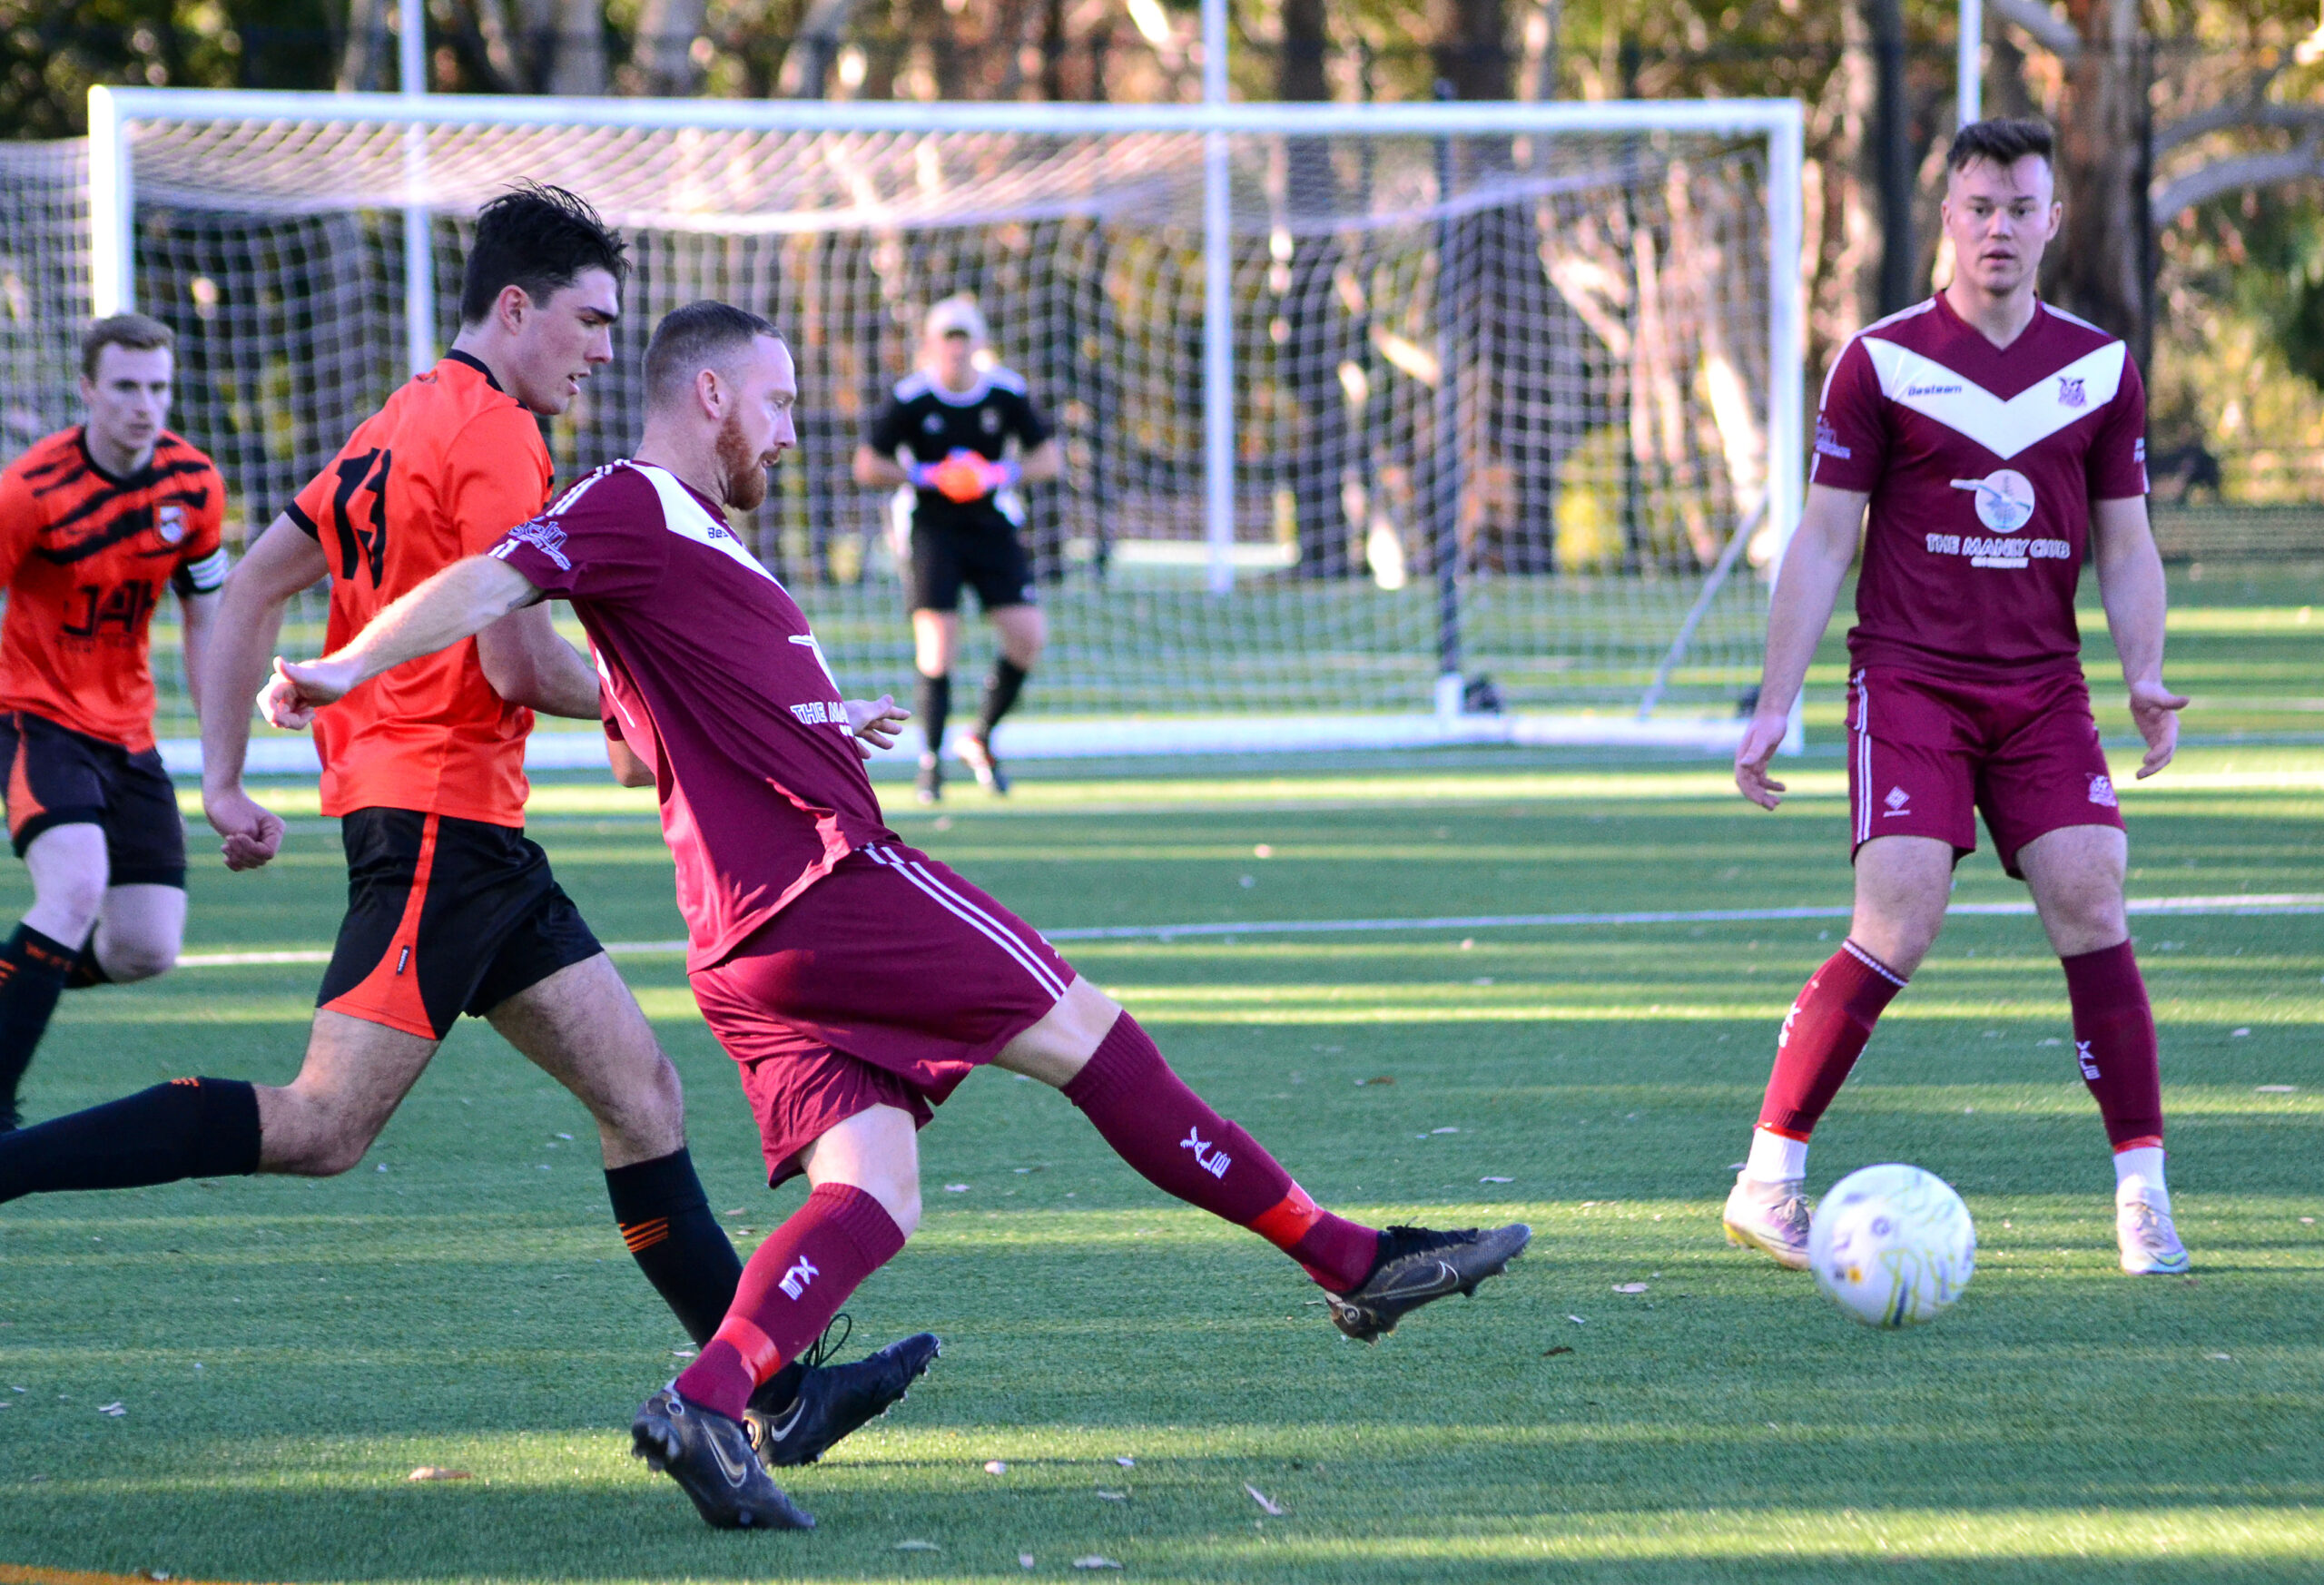 Action from the 2023 MWFA Men's Premier League game between Wakehurst and Manly Vale. Photo credit: Graeme Bolton